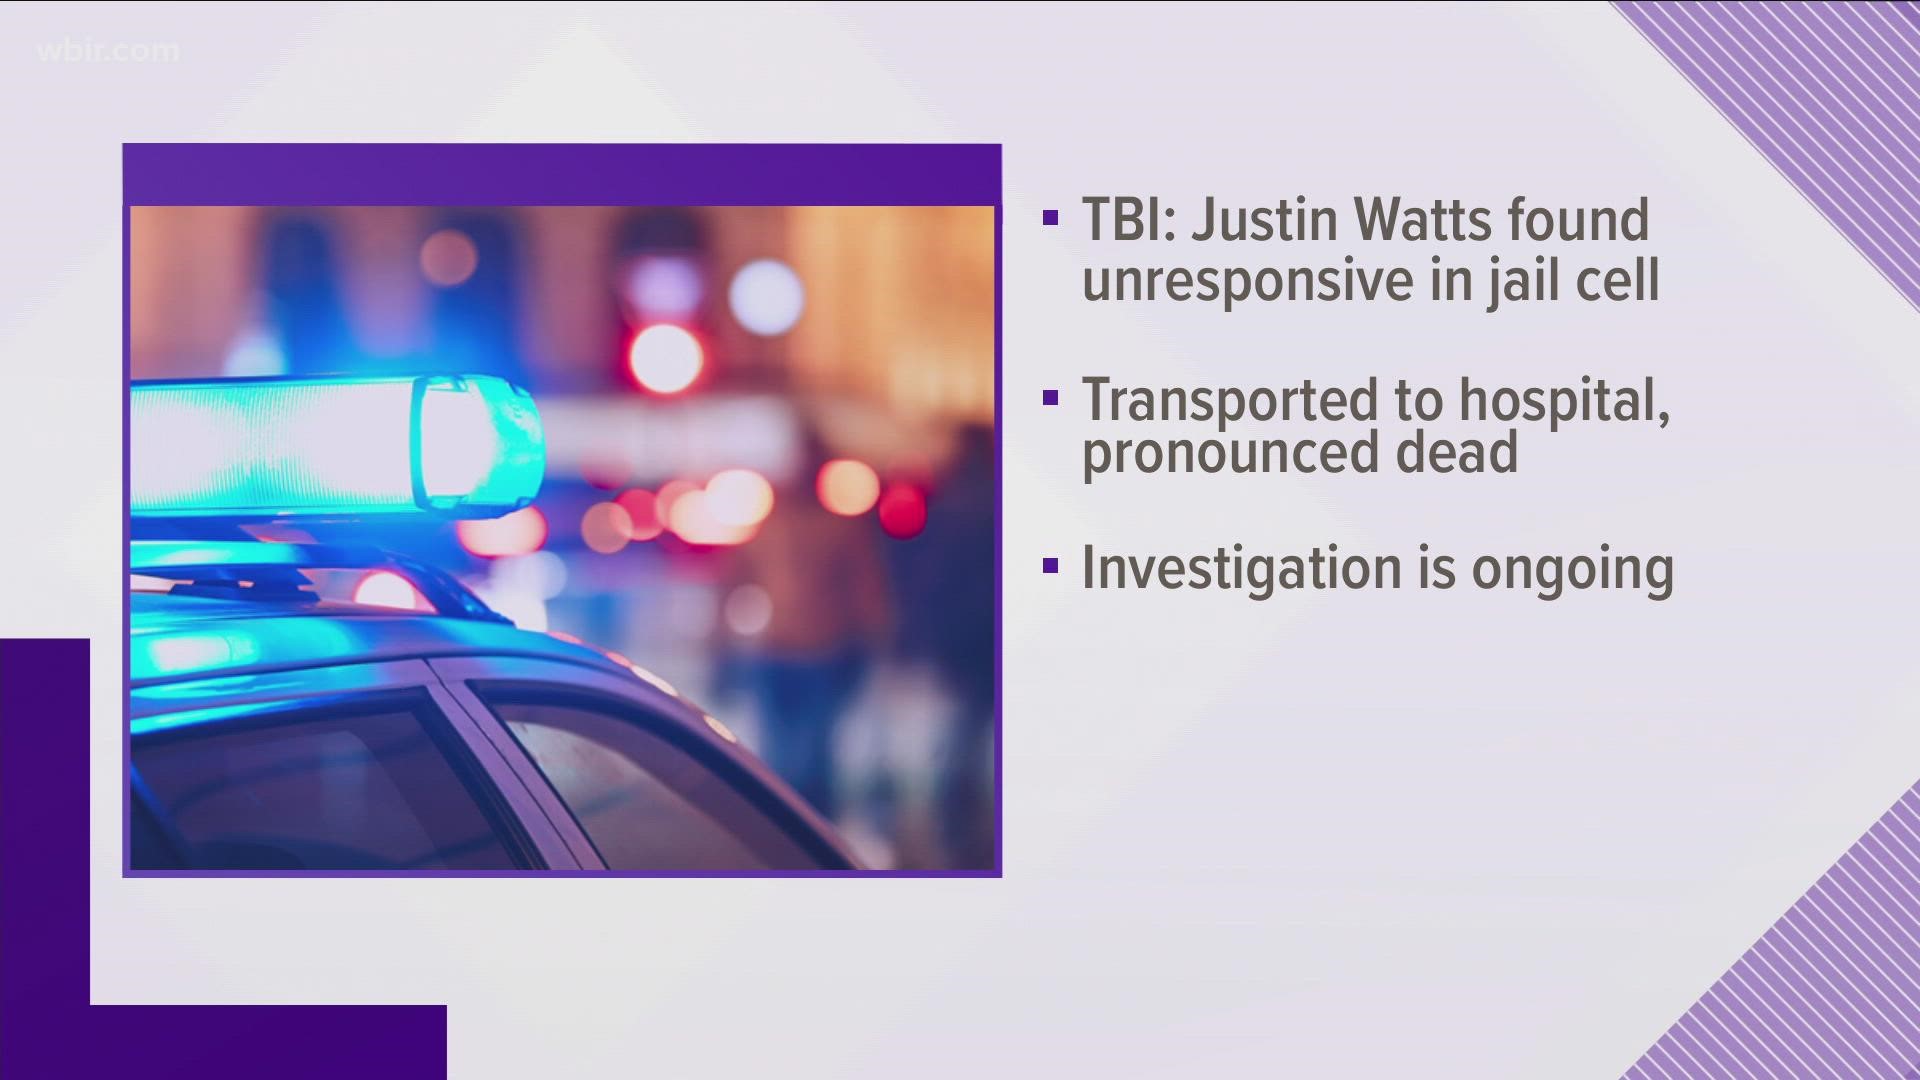 TBI said that on Tuesday, Justin Watts was found unresponsive in his cell.